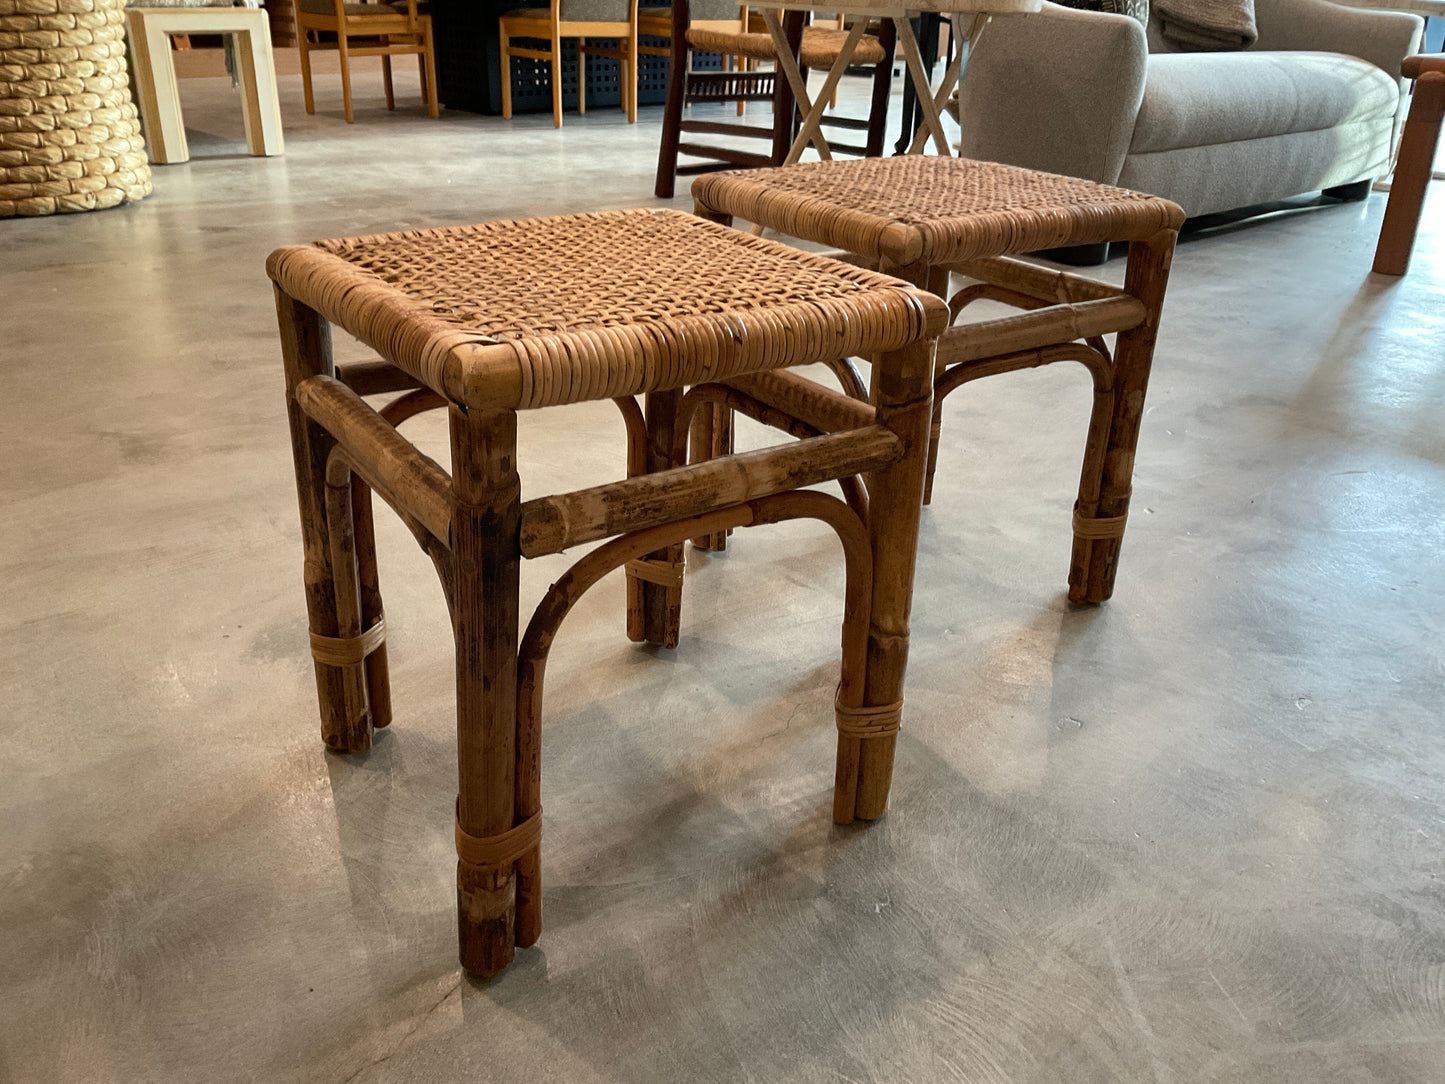 Woven Top Rattan Side Table